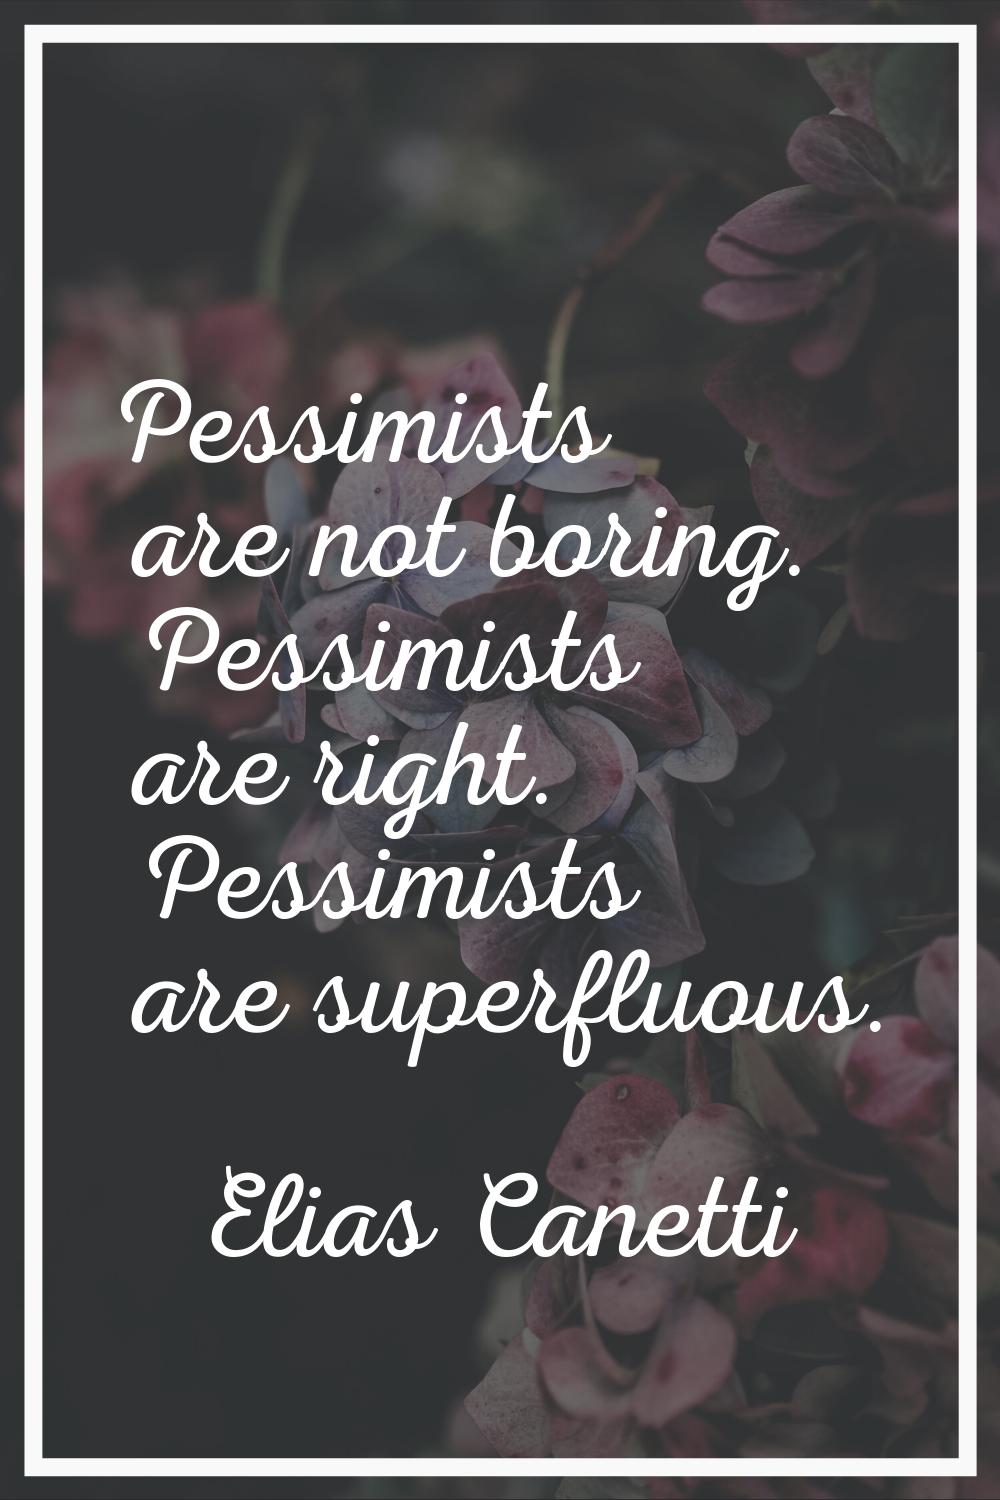 Pessimists are not boring. Pessimists are right. Pessimists are superfluous.